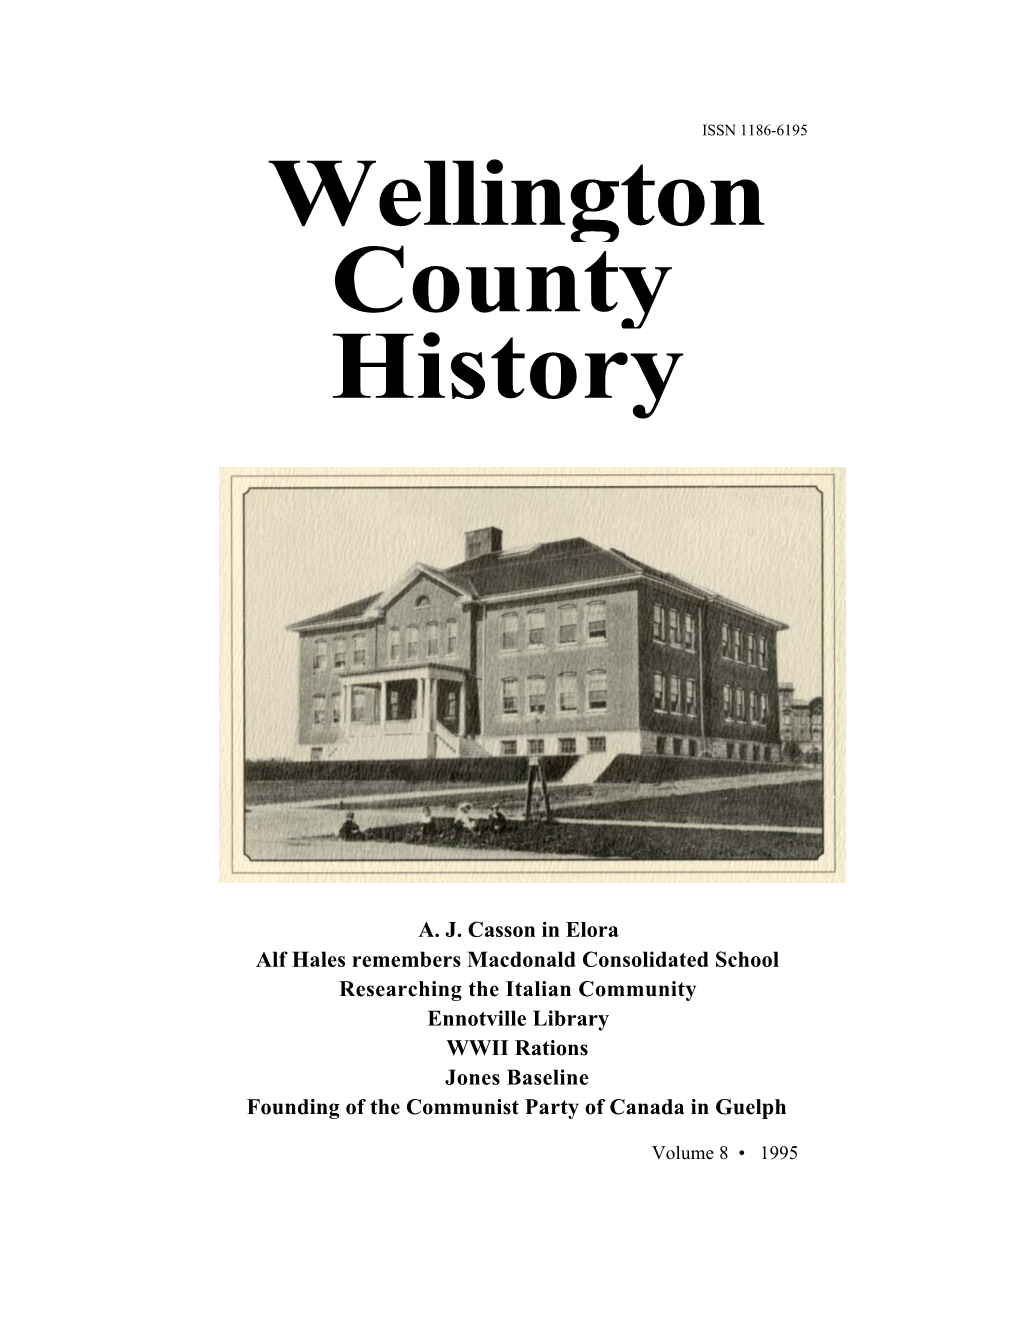 WELLINGTON COUNTY HISTORY Was Assisted by Generous Donations from the Following